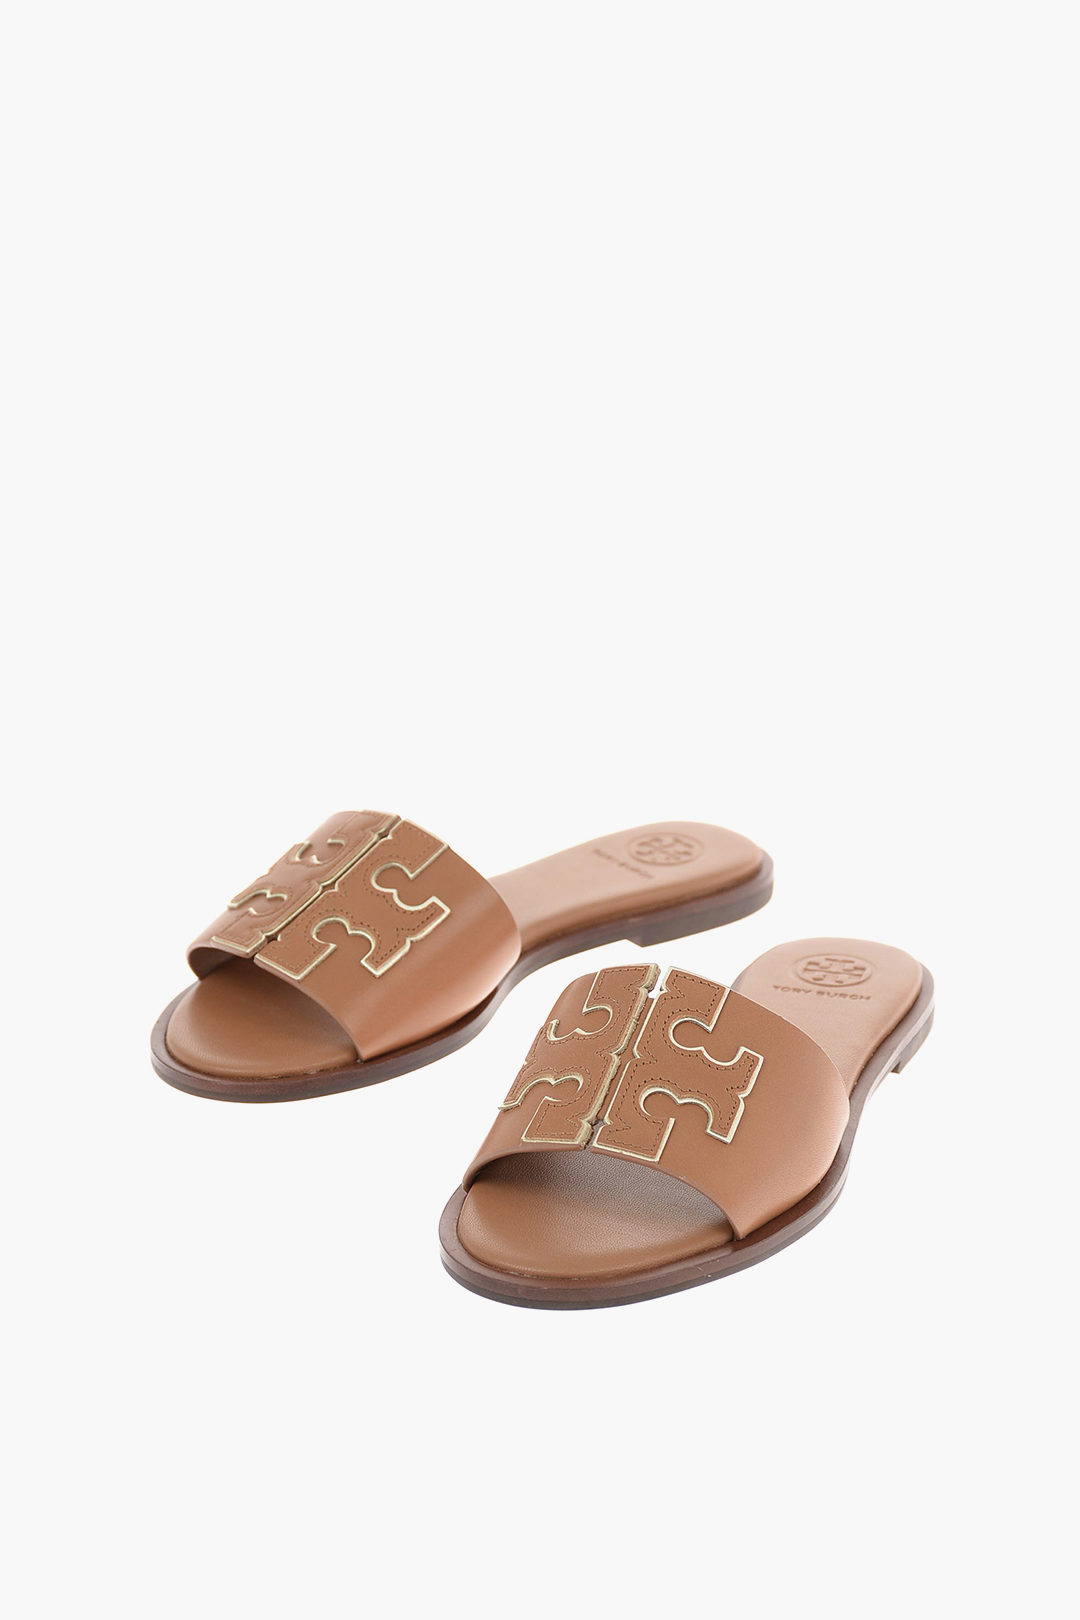 Tory Burch leather INES Slides women - Glamood Outlet